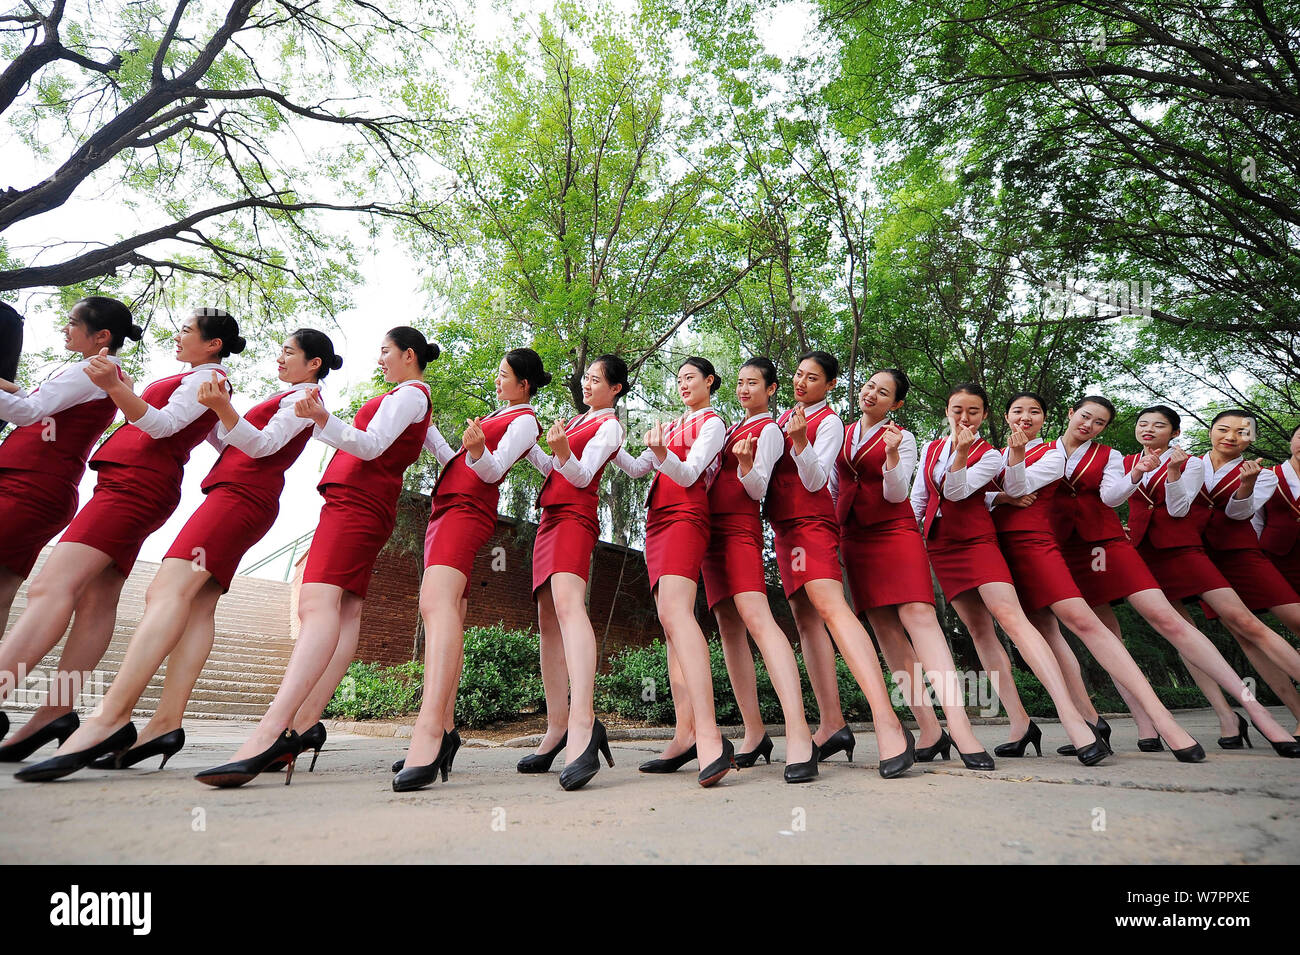 Discover 120+ air india cabin crew dress